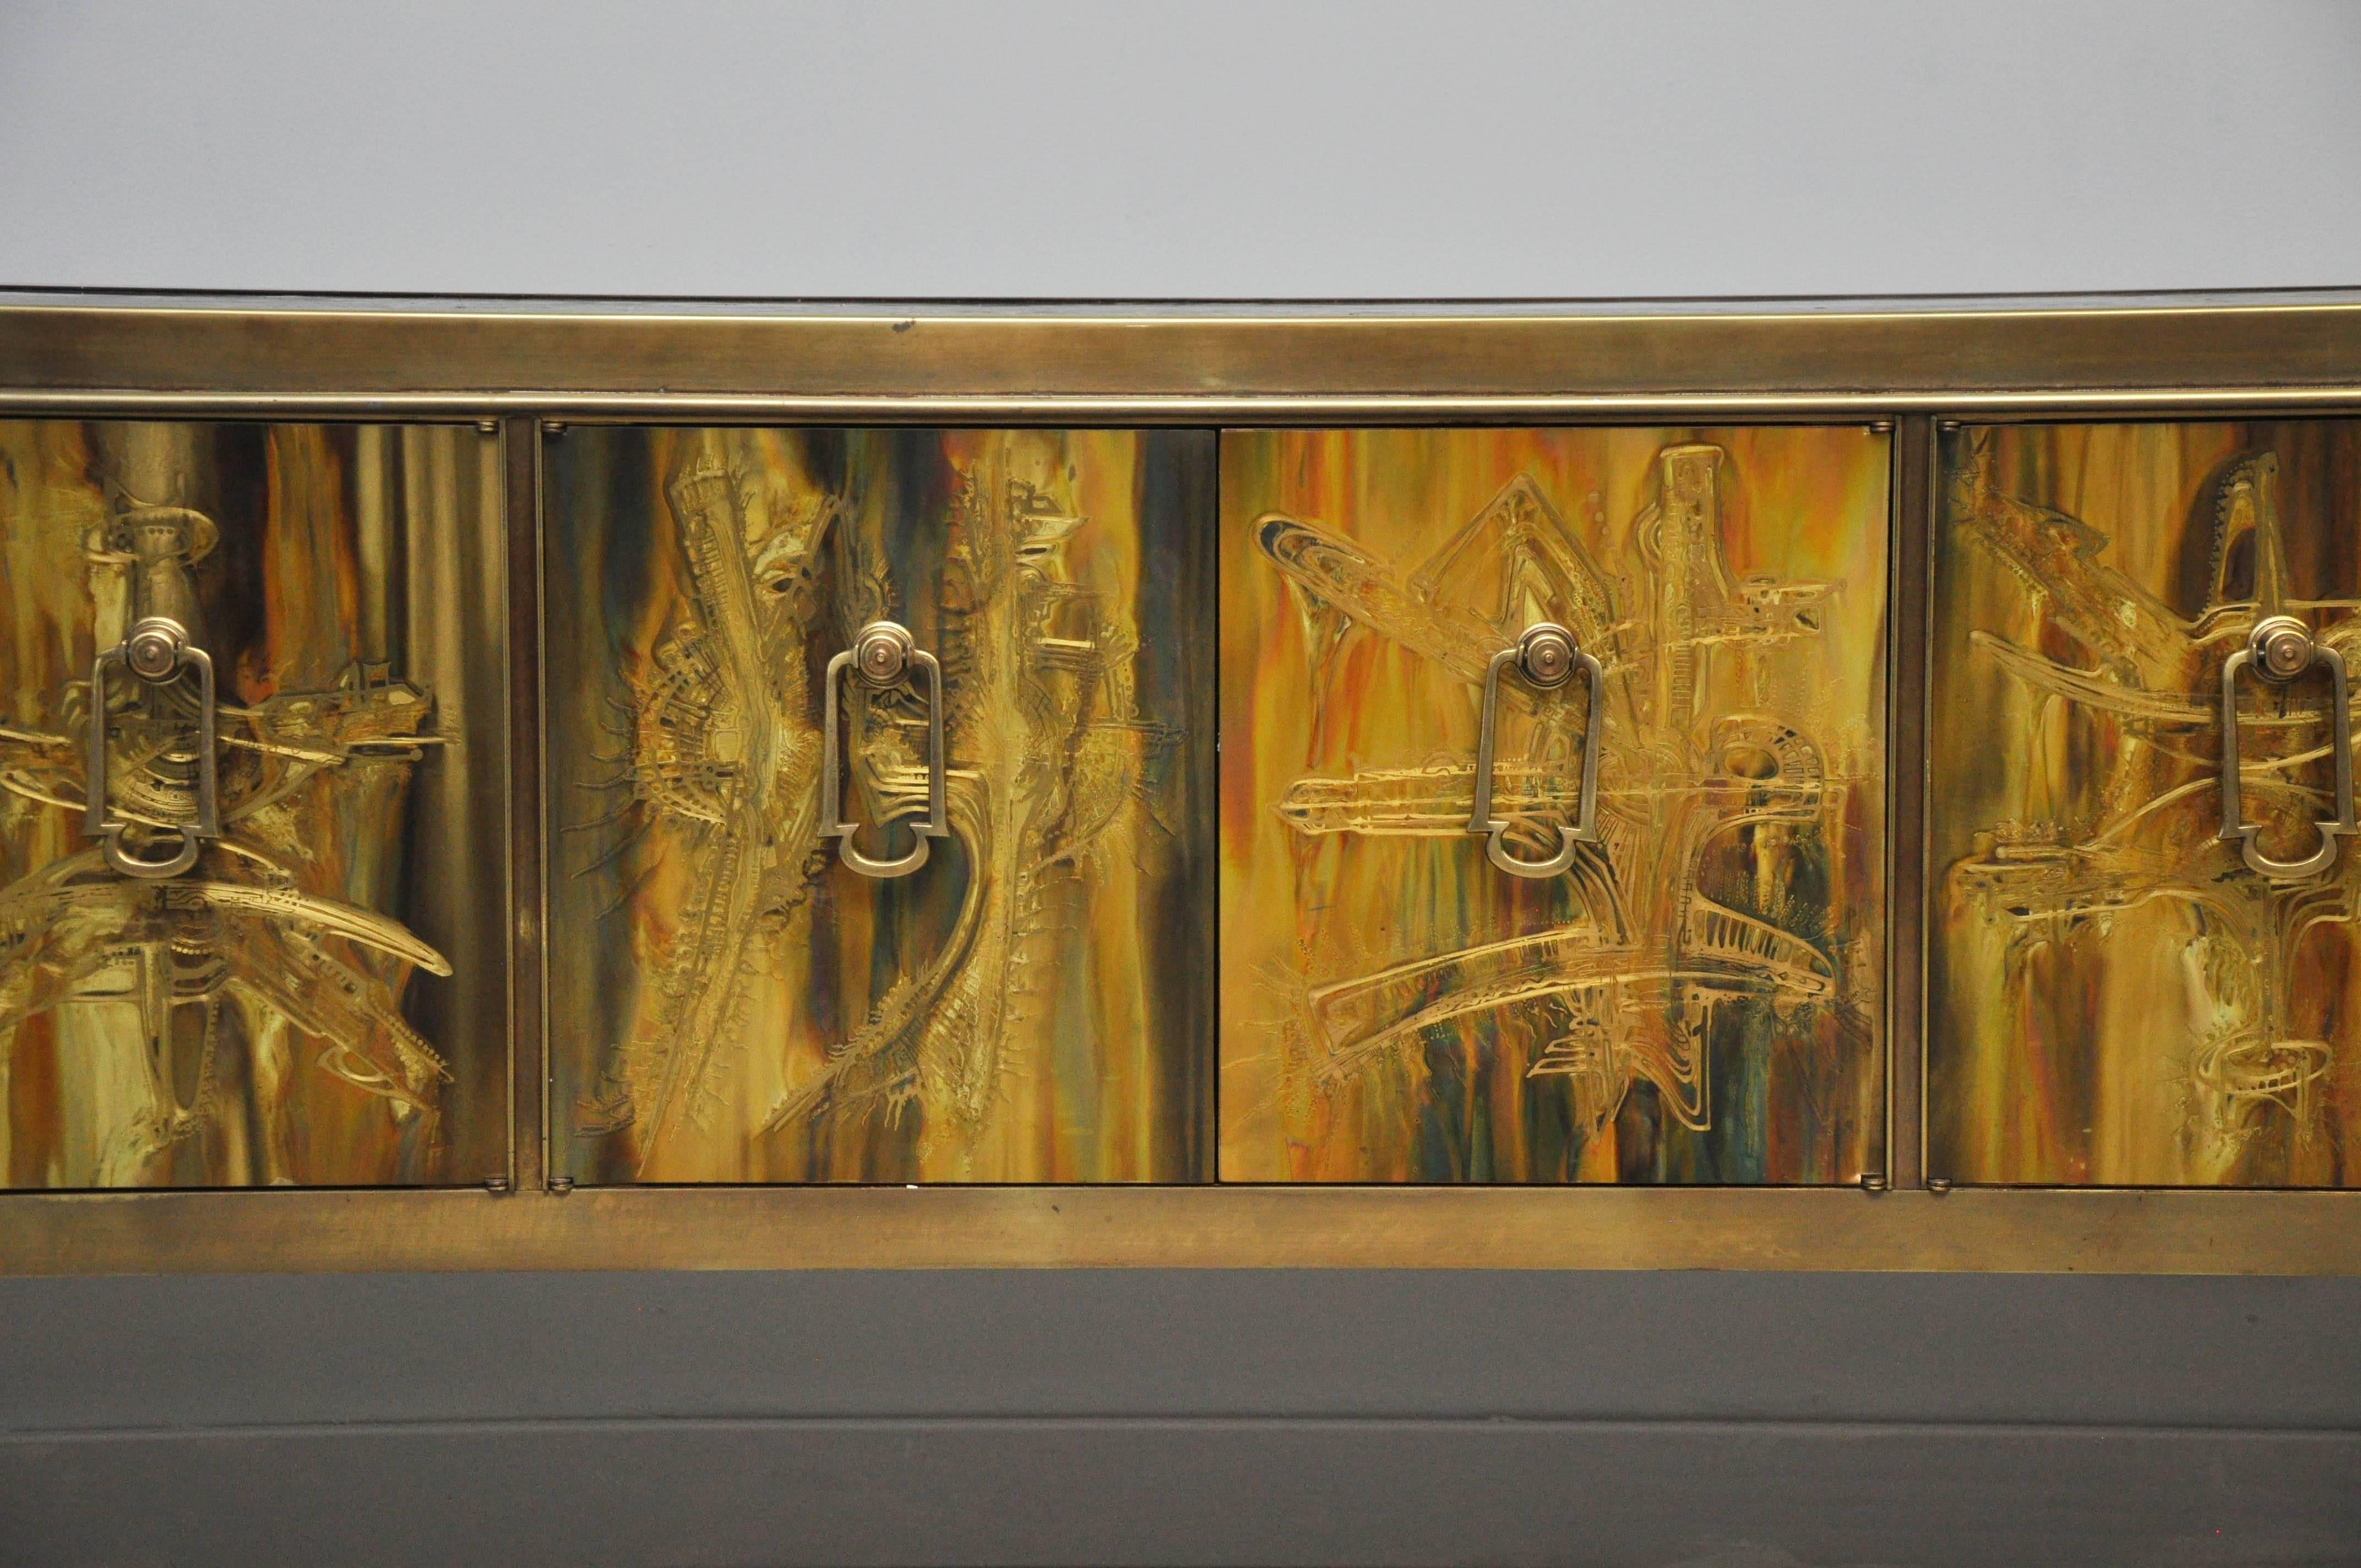 Brass credenza designed by Bernhard Rohne for Mastercraft. Brass panels were acid etched by Rohne to produce this magnificent piece of art. Doors open to a gold interior.